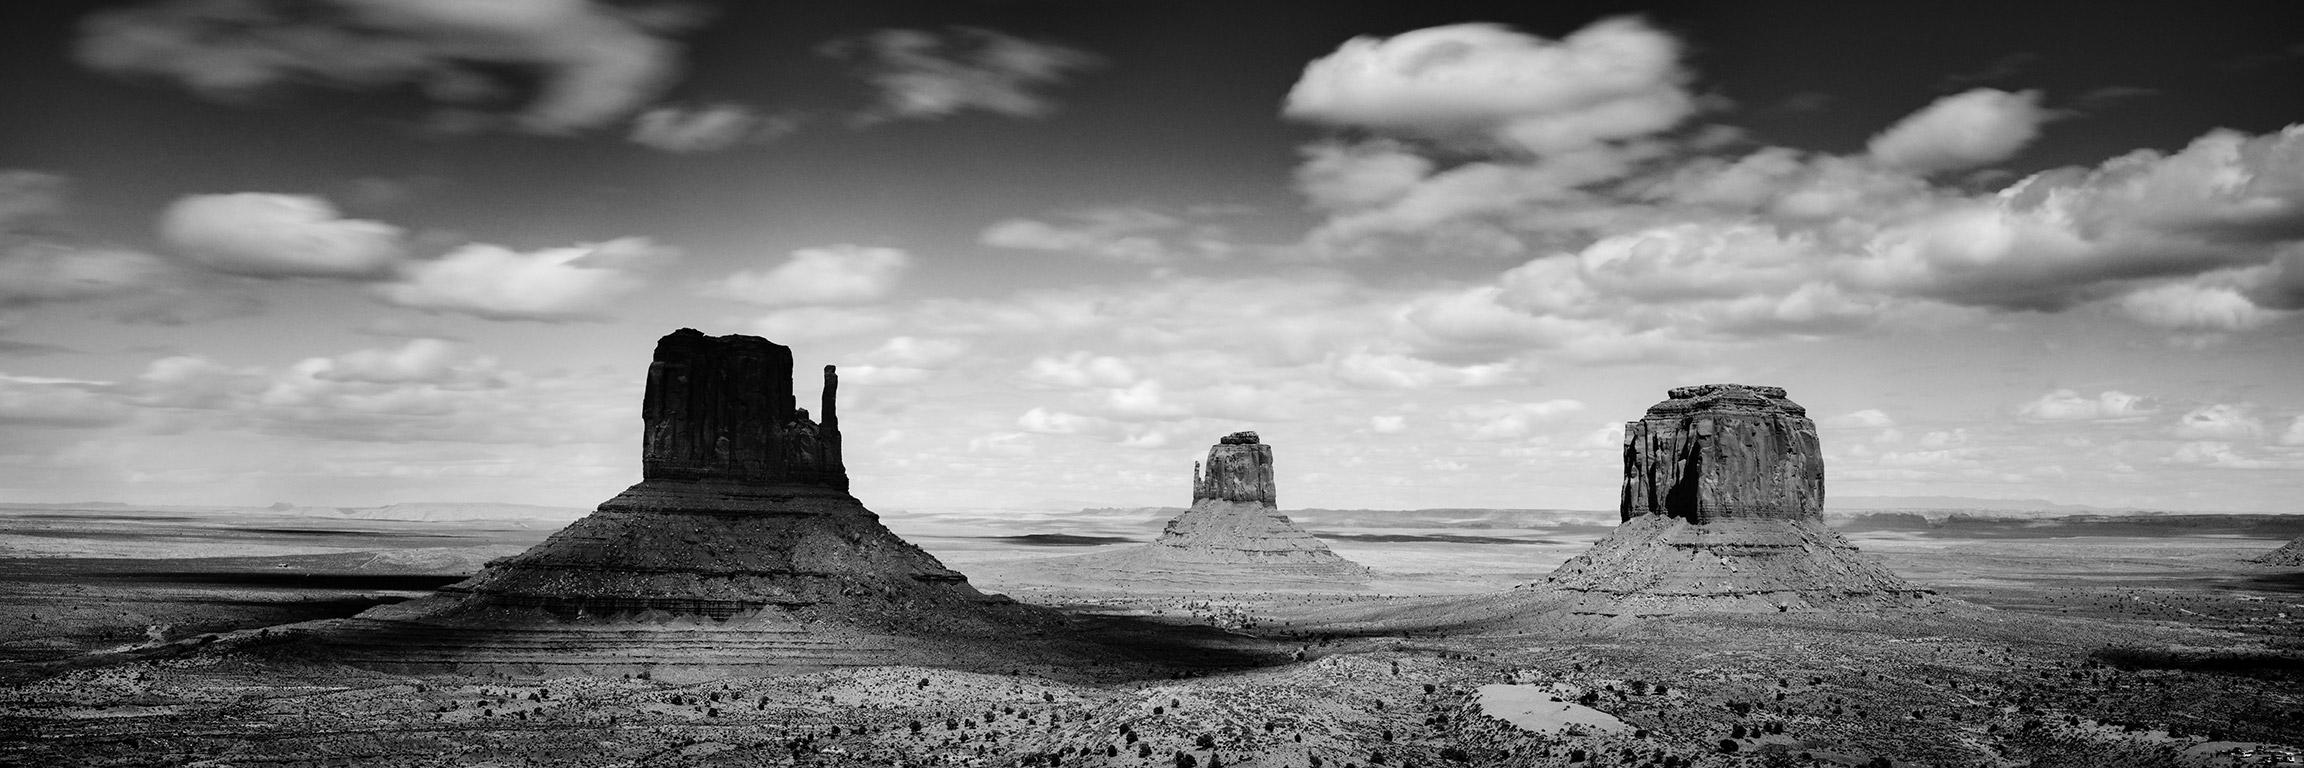 Gerald Berghammer Landscape Photograph - Monument Valley Panorama, Mojave Desert, black and white landscape photography